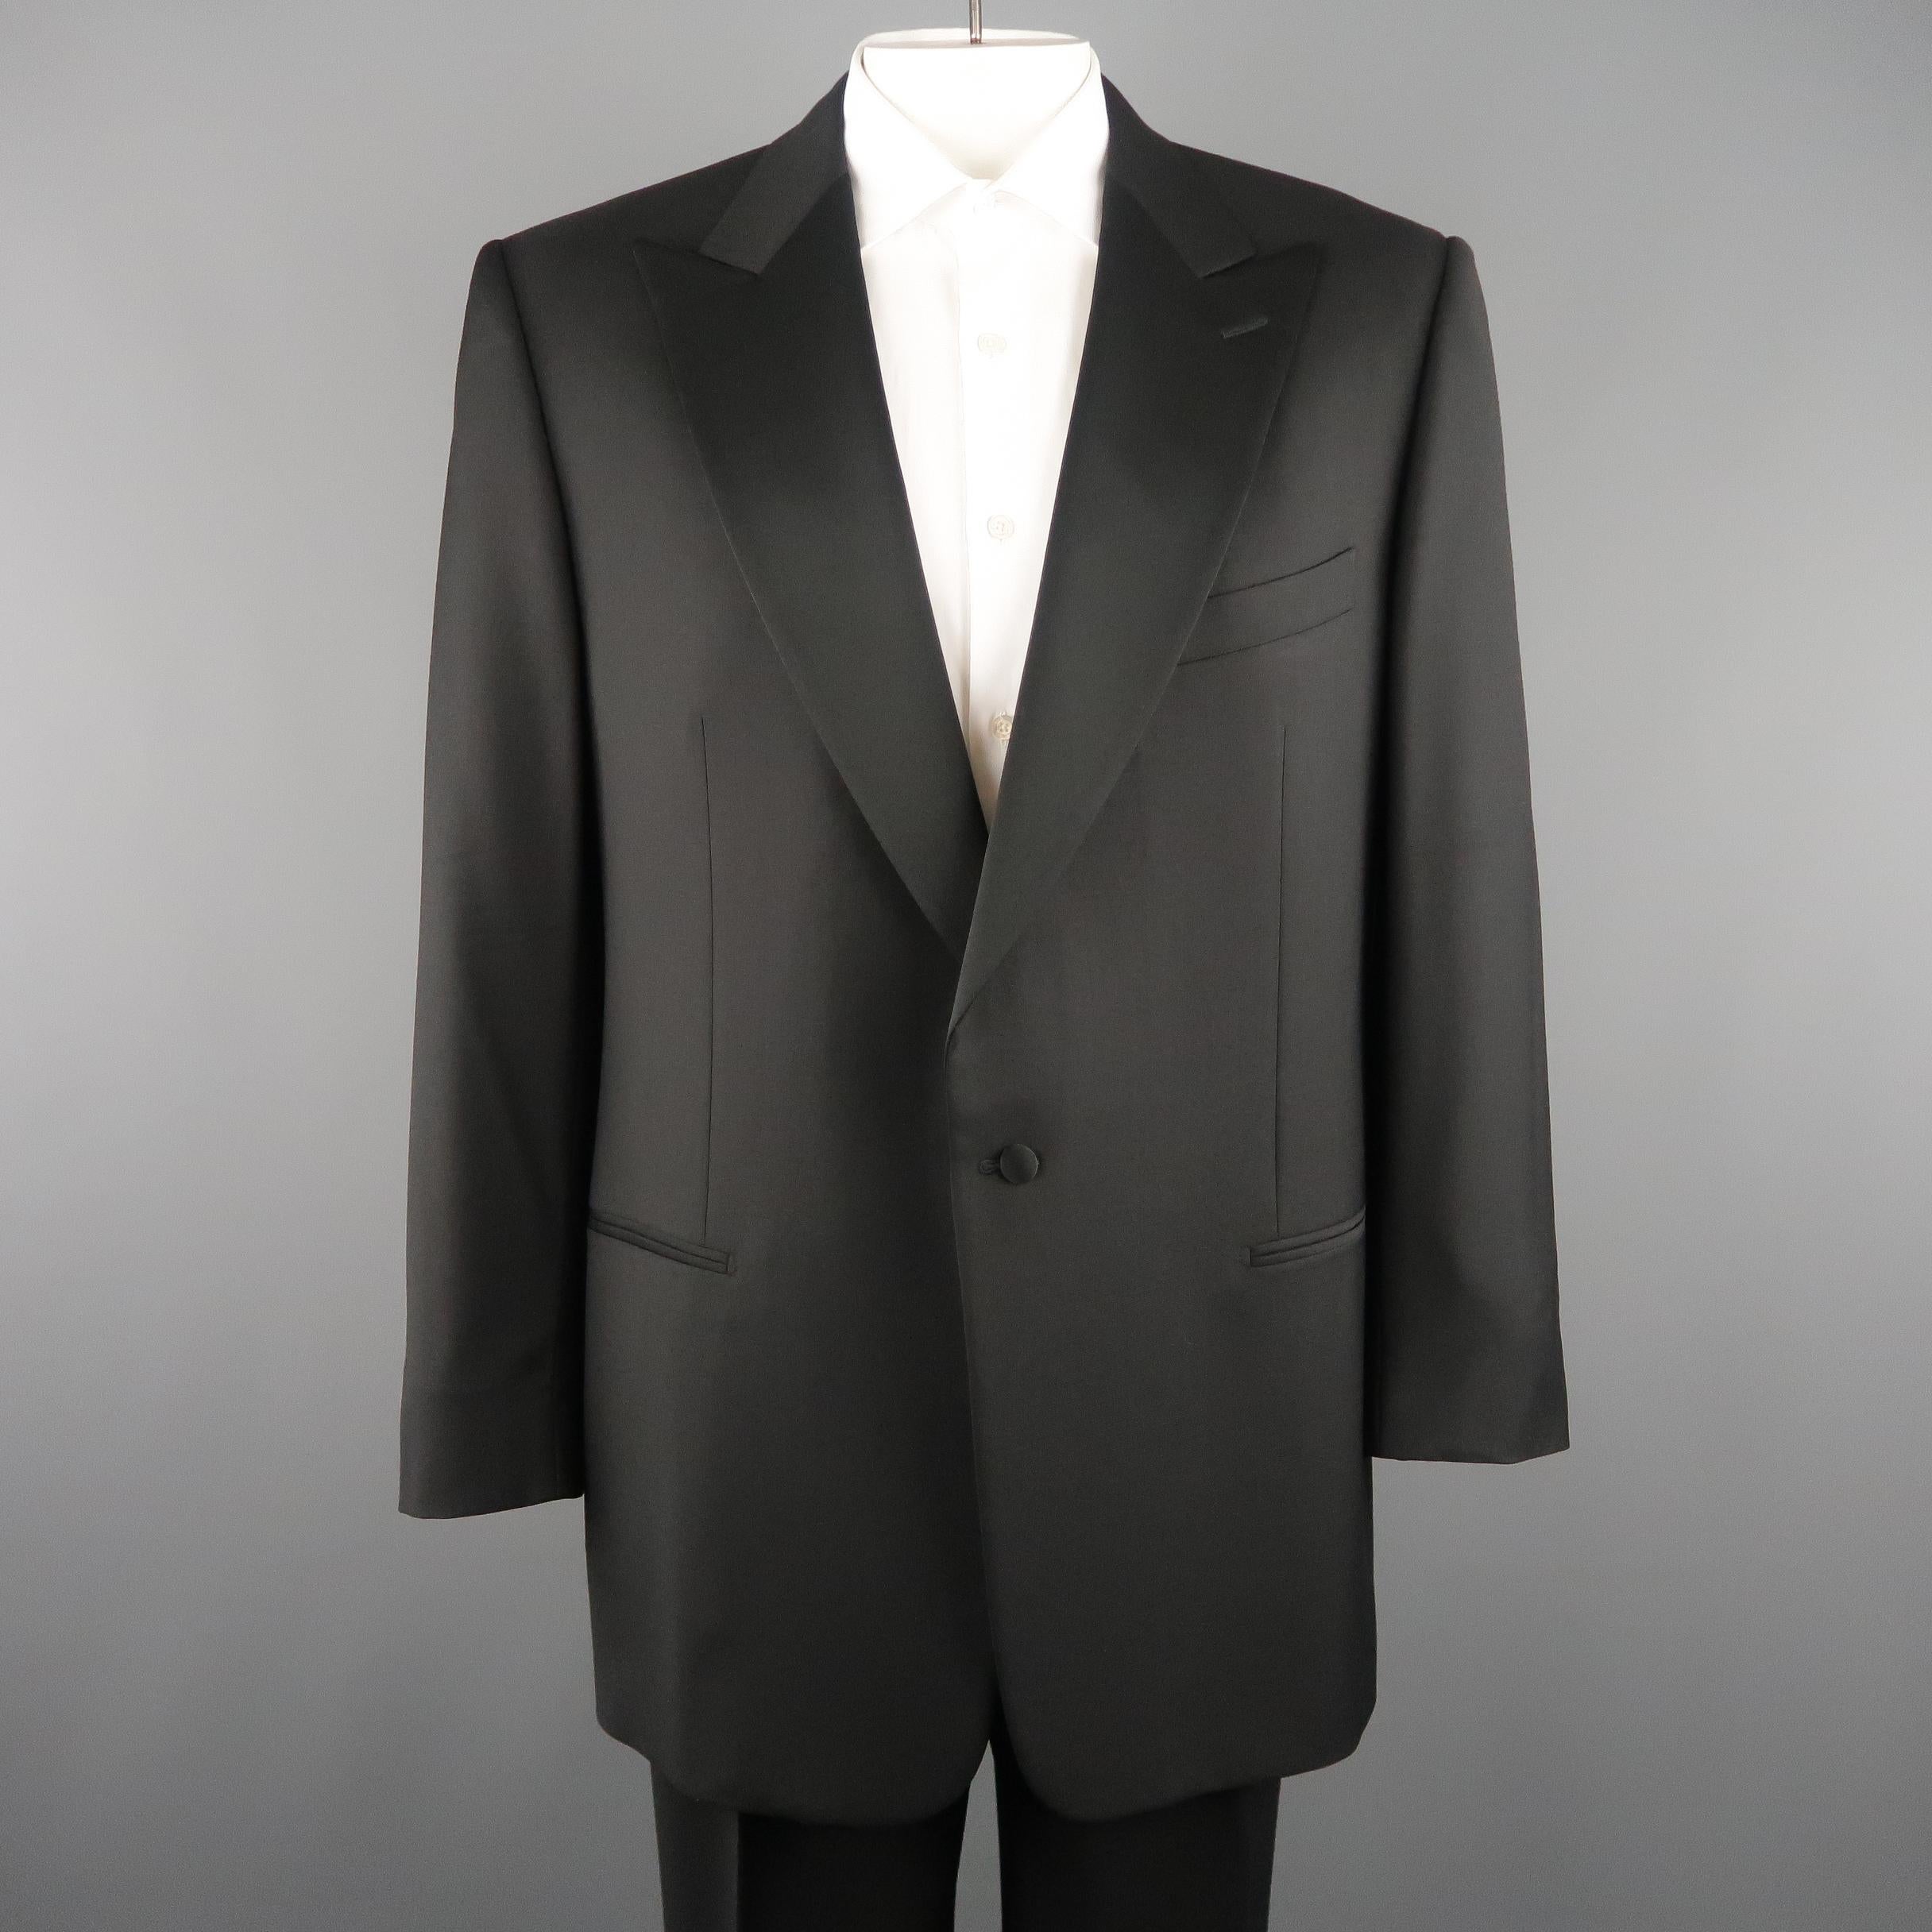 ERMENEGILDO ZEGNA tuxedo suit comes in black wool and includes a single button sport jacket with a satin peak lapel and matching tuxedo stripe pleated trousers. Made in Switzerland.
 
Excellent Pre-Owned Condition.
Marked: IT 58
 
Measurements:
